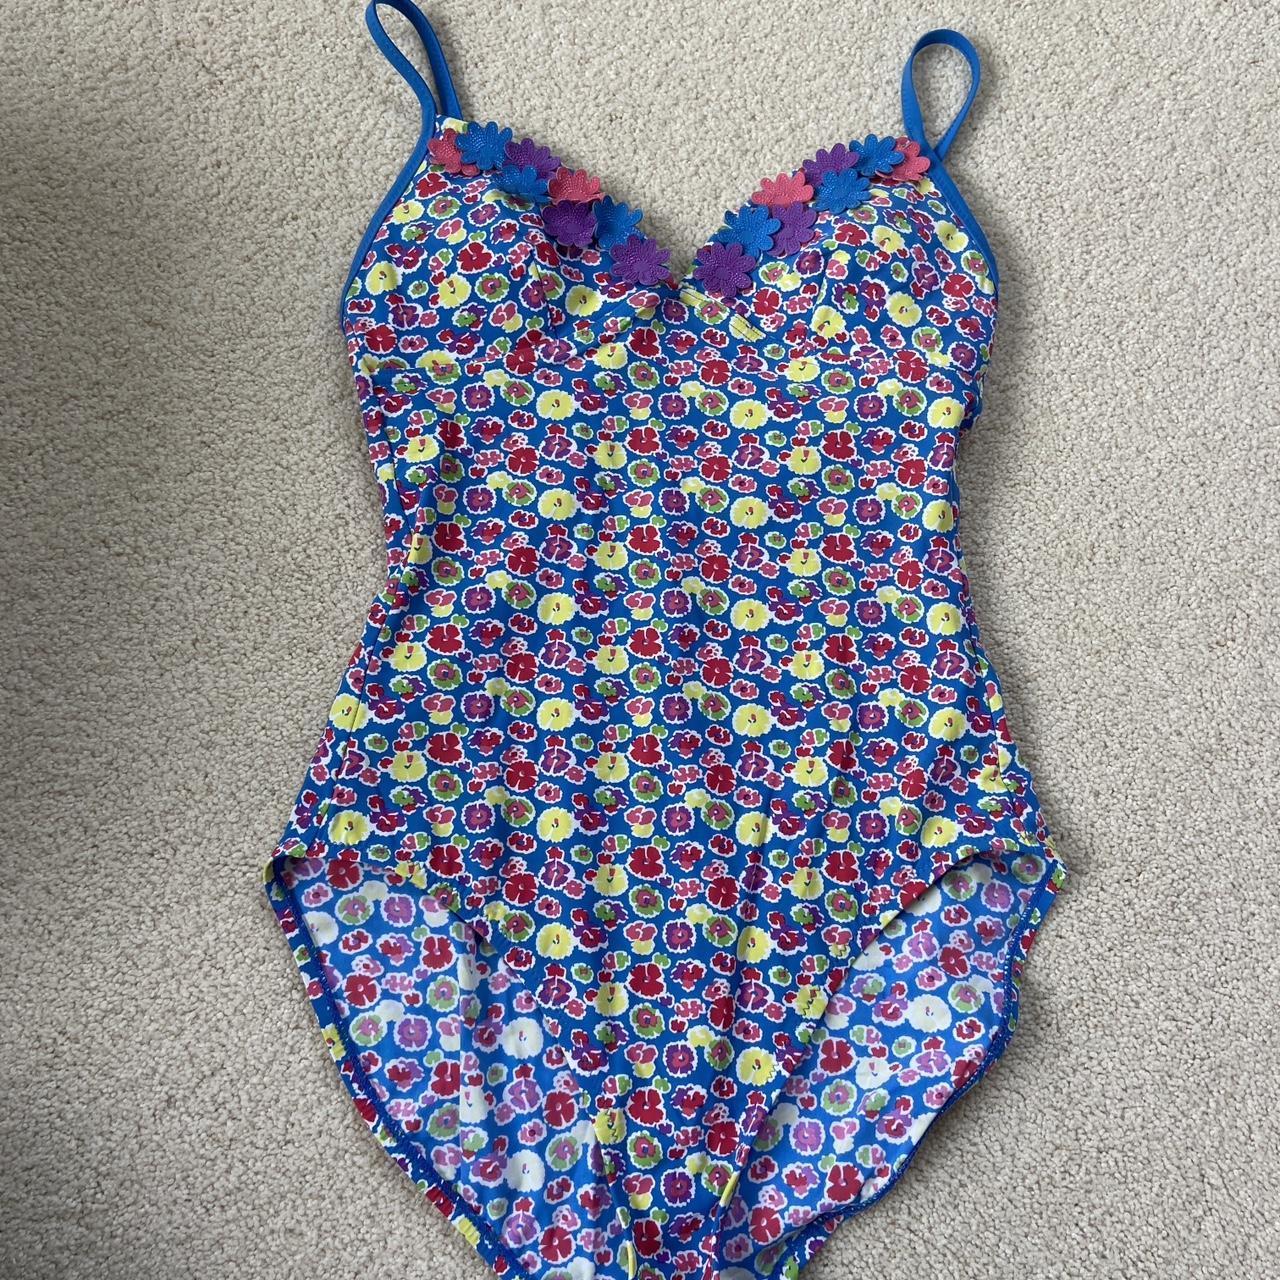 Boden One Piece Bathing Suit Depop payment only not... - Depop